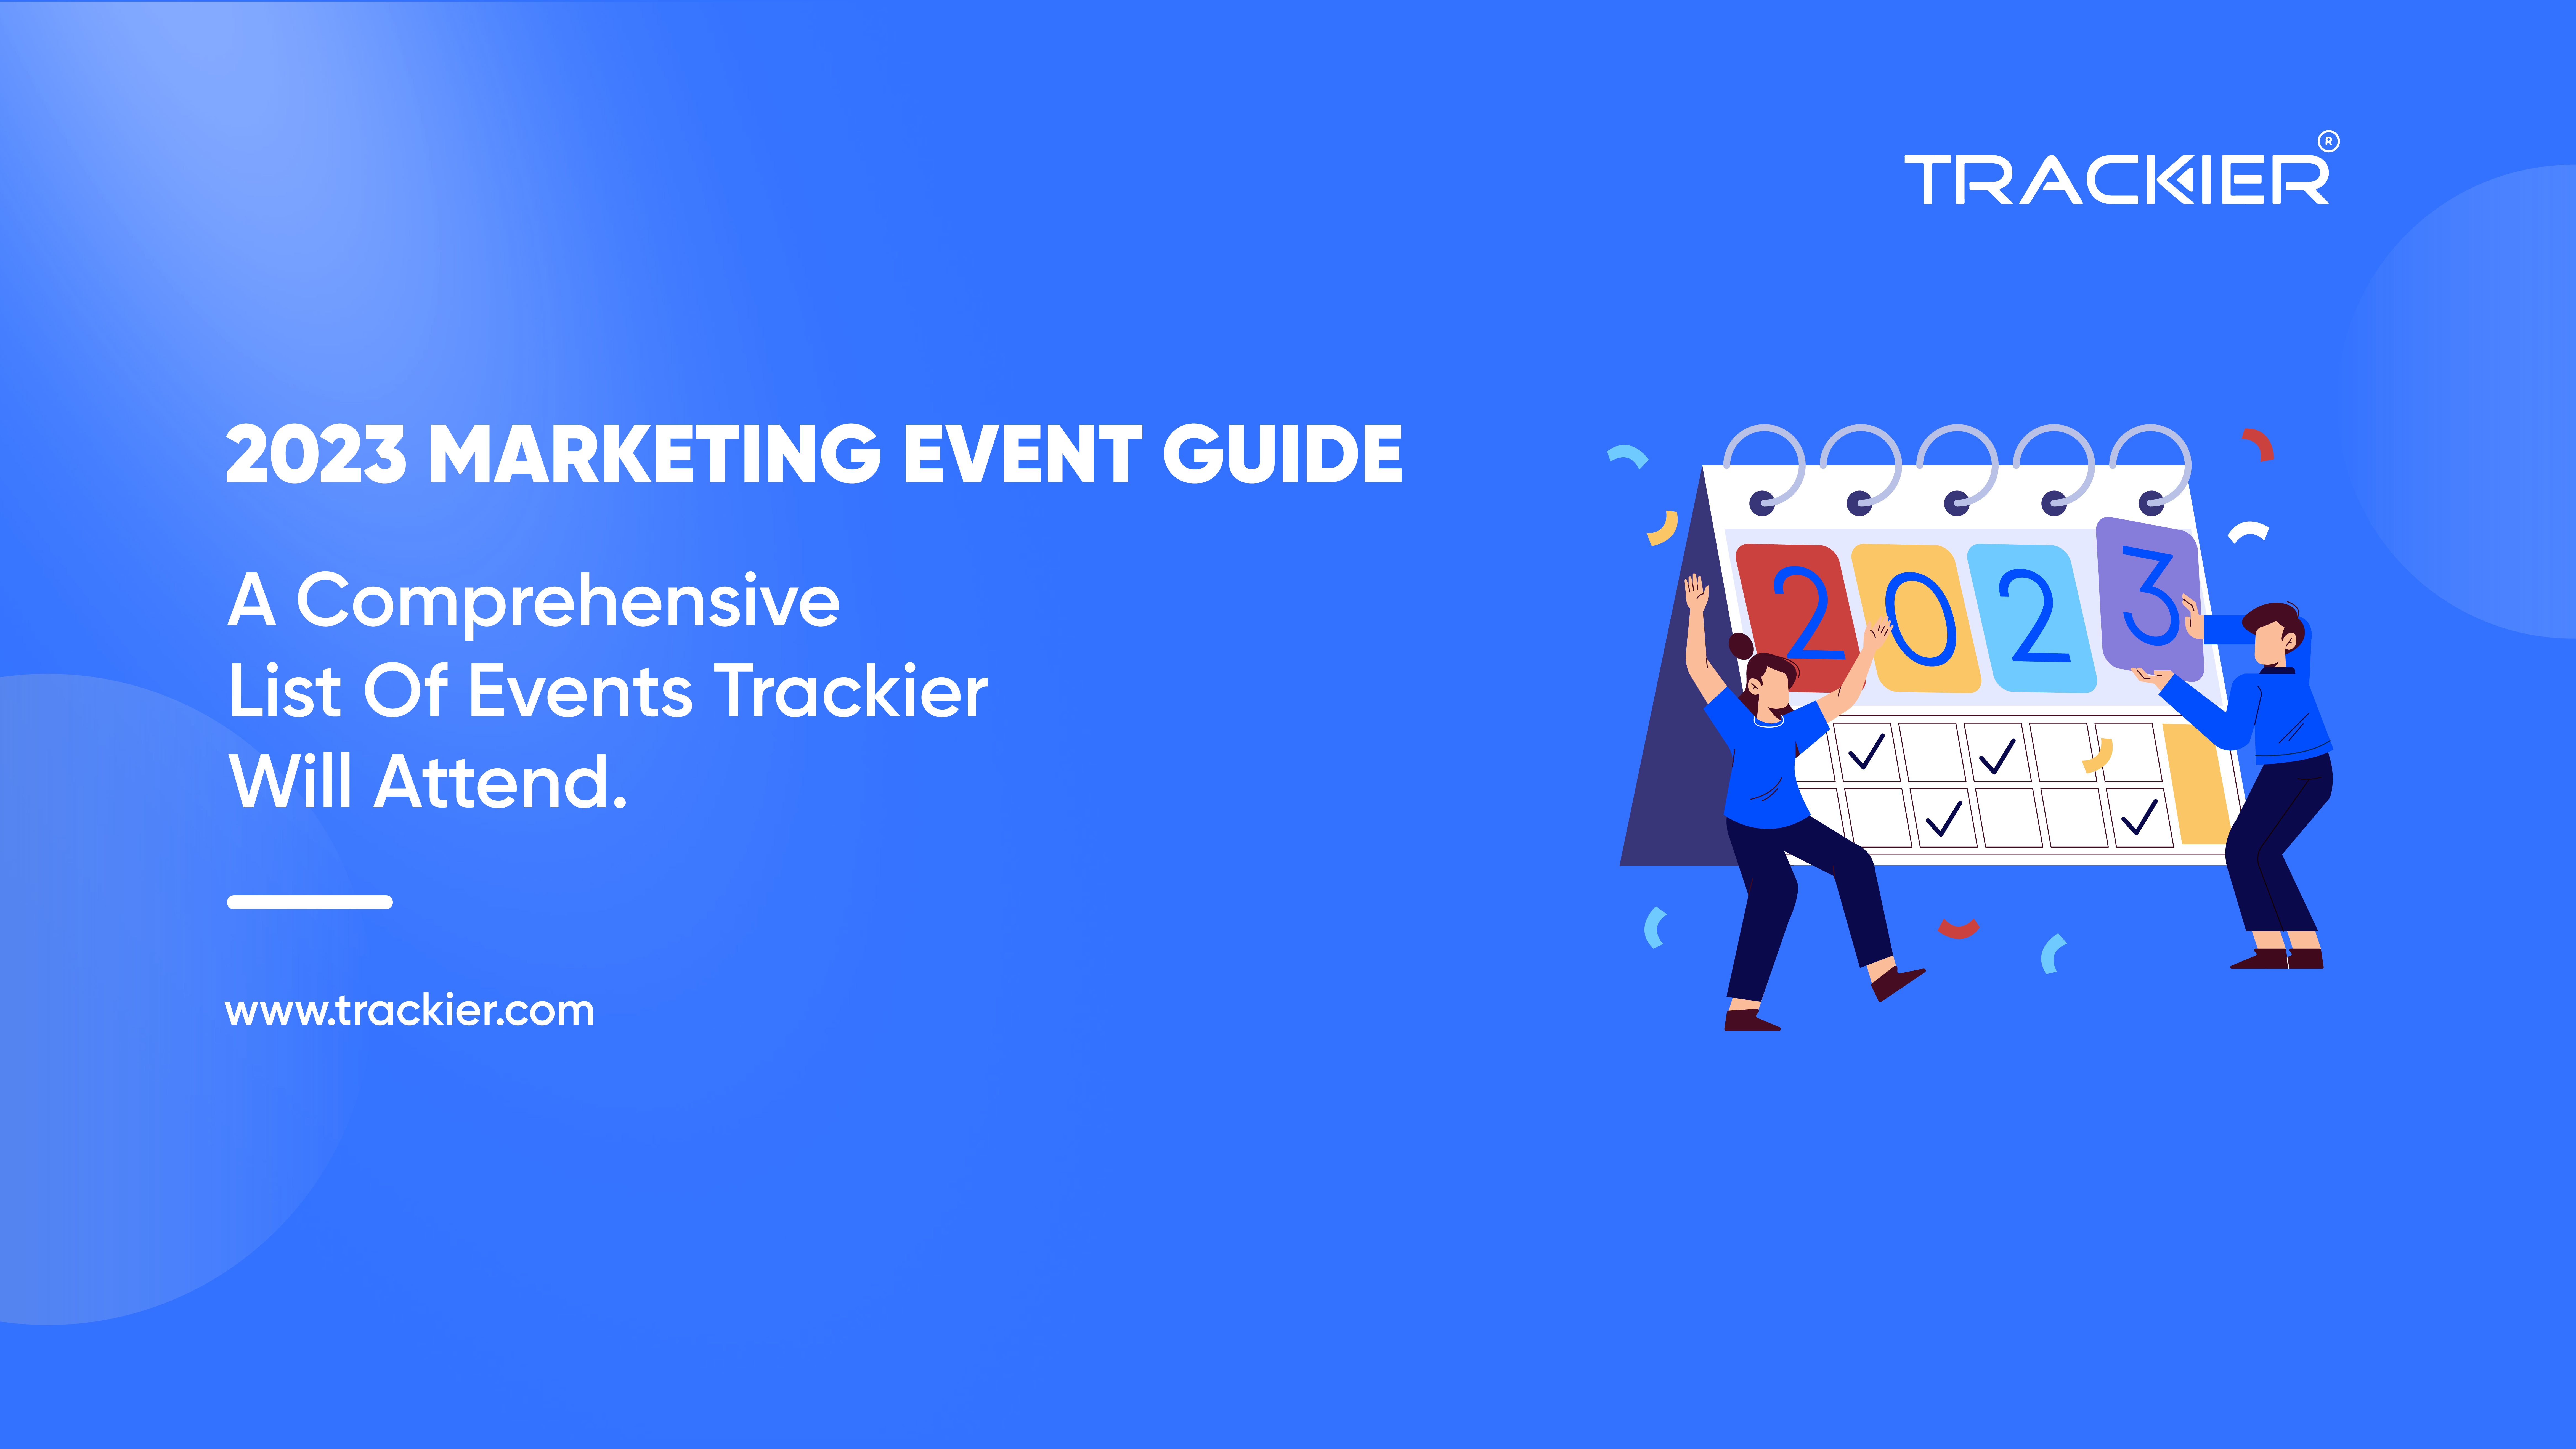 Marketing Events Guide 2023 Trackier Will Attend